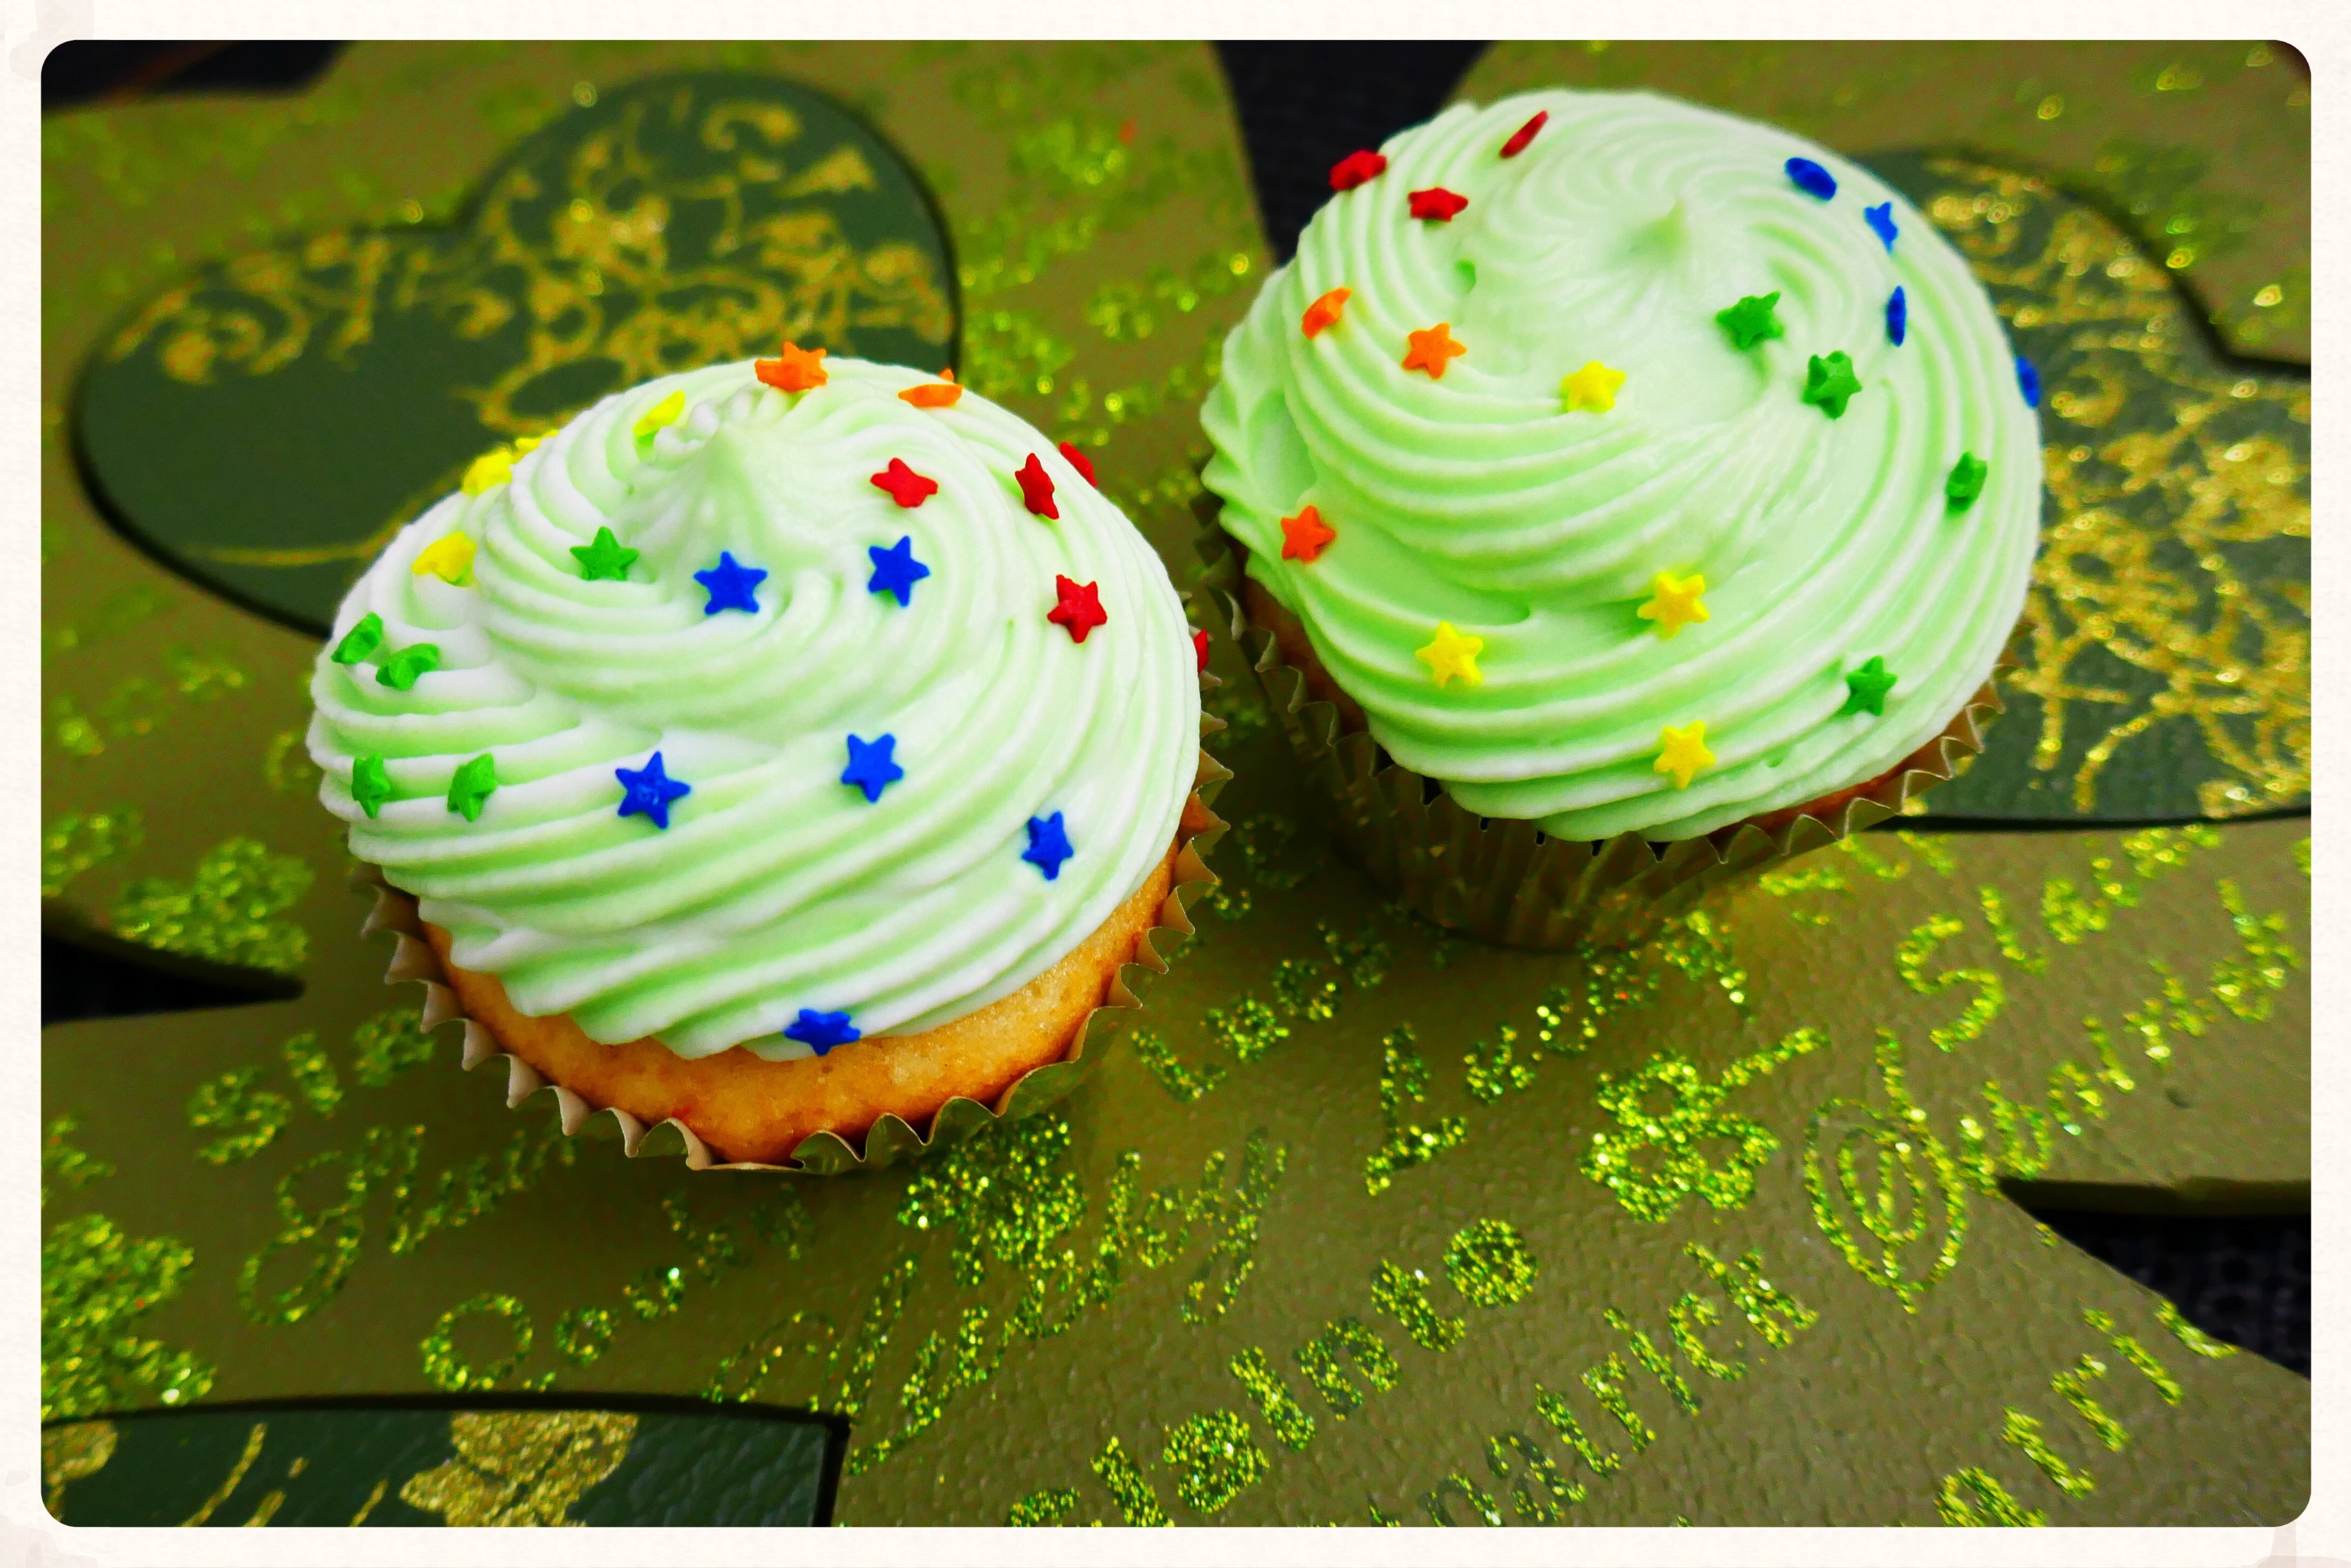 St Patrick's Day Cupcakes